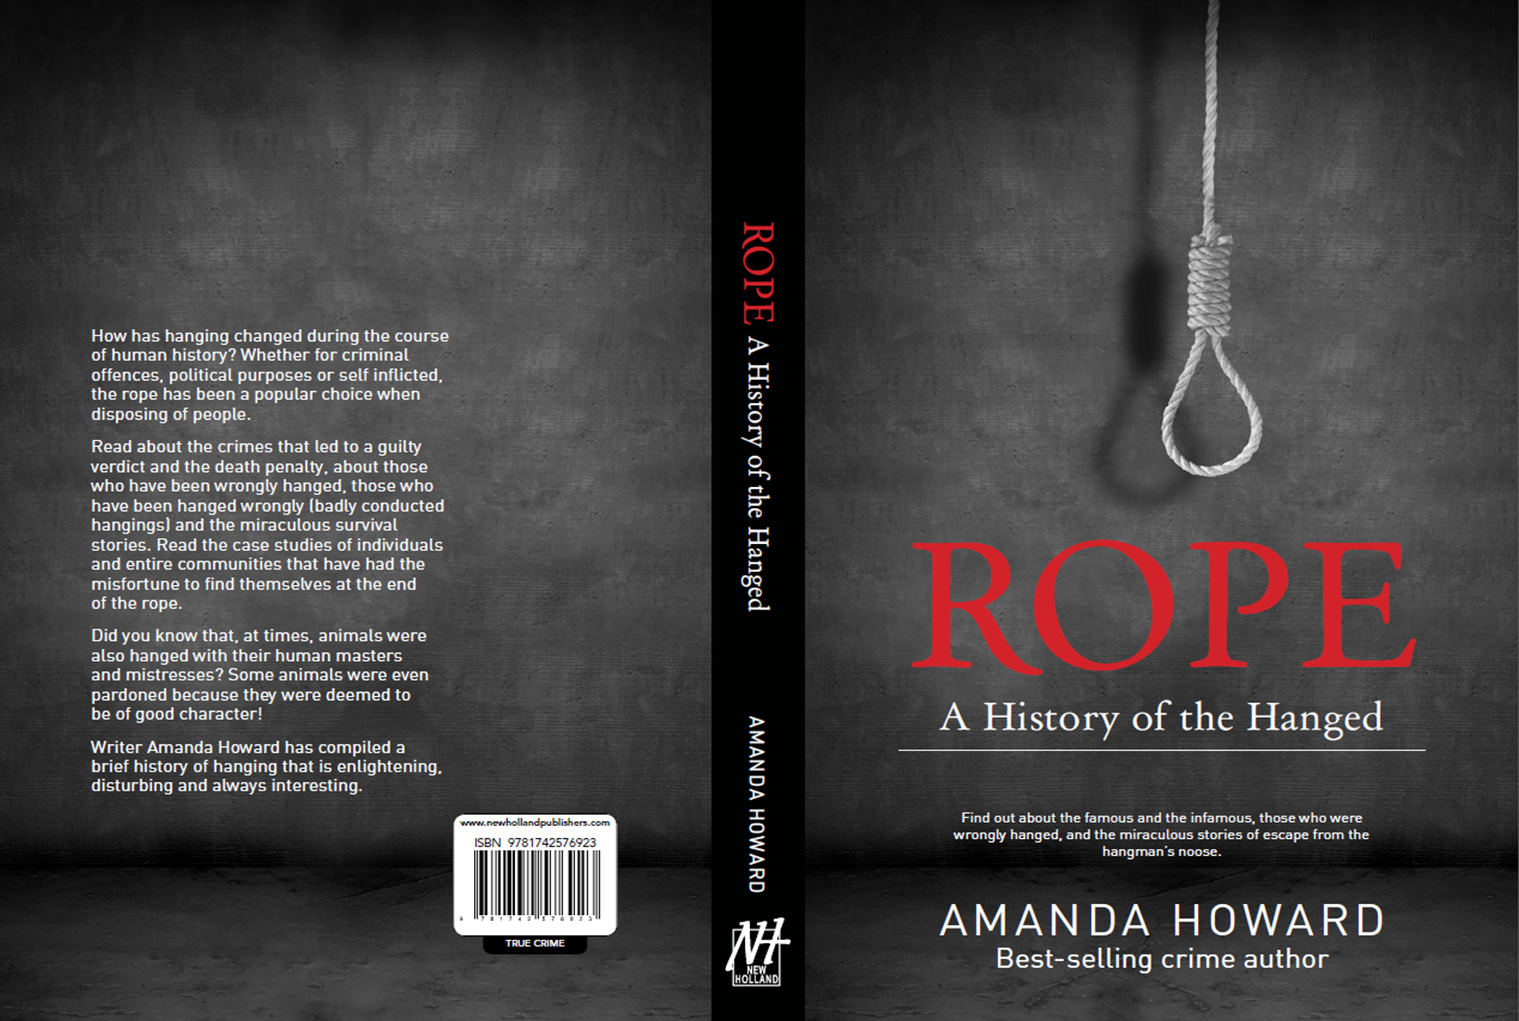 AMANDA HOWARD permission to use Rope HR cover